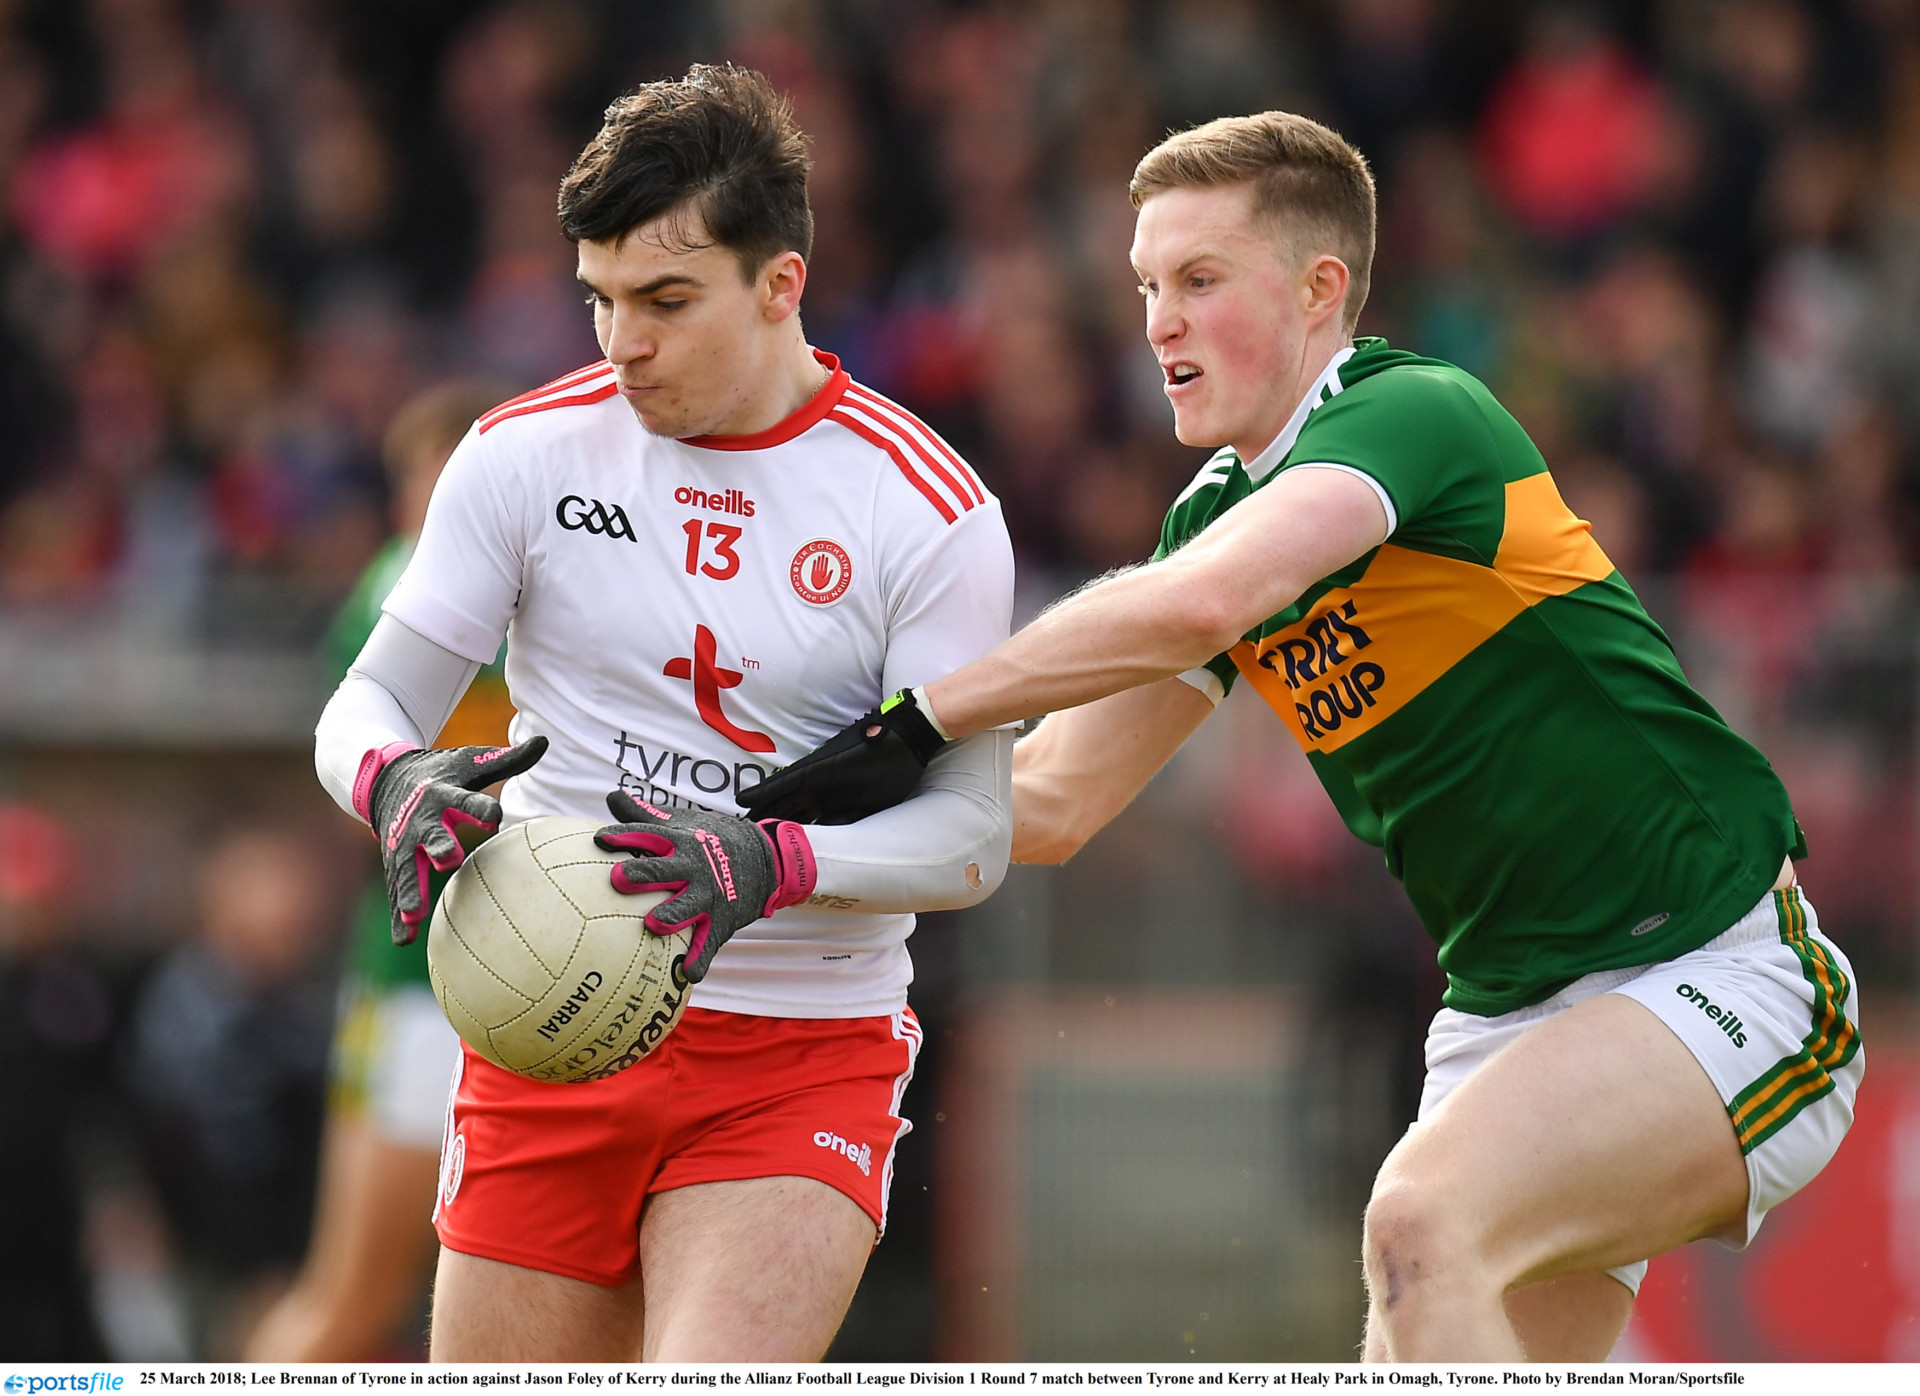 Tyrone departures a ‘concern’ says former Dubs star McMahon